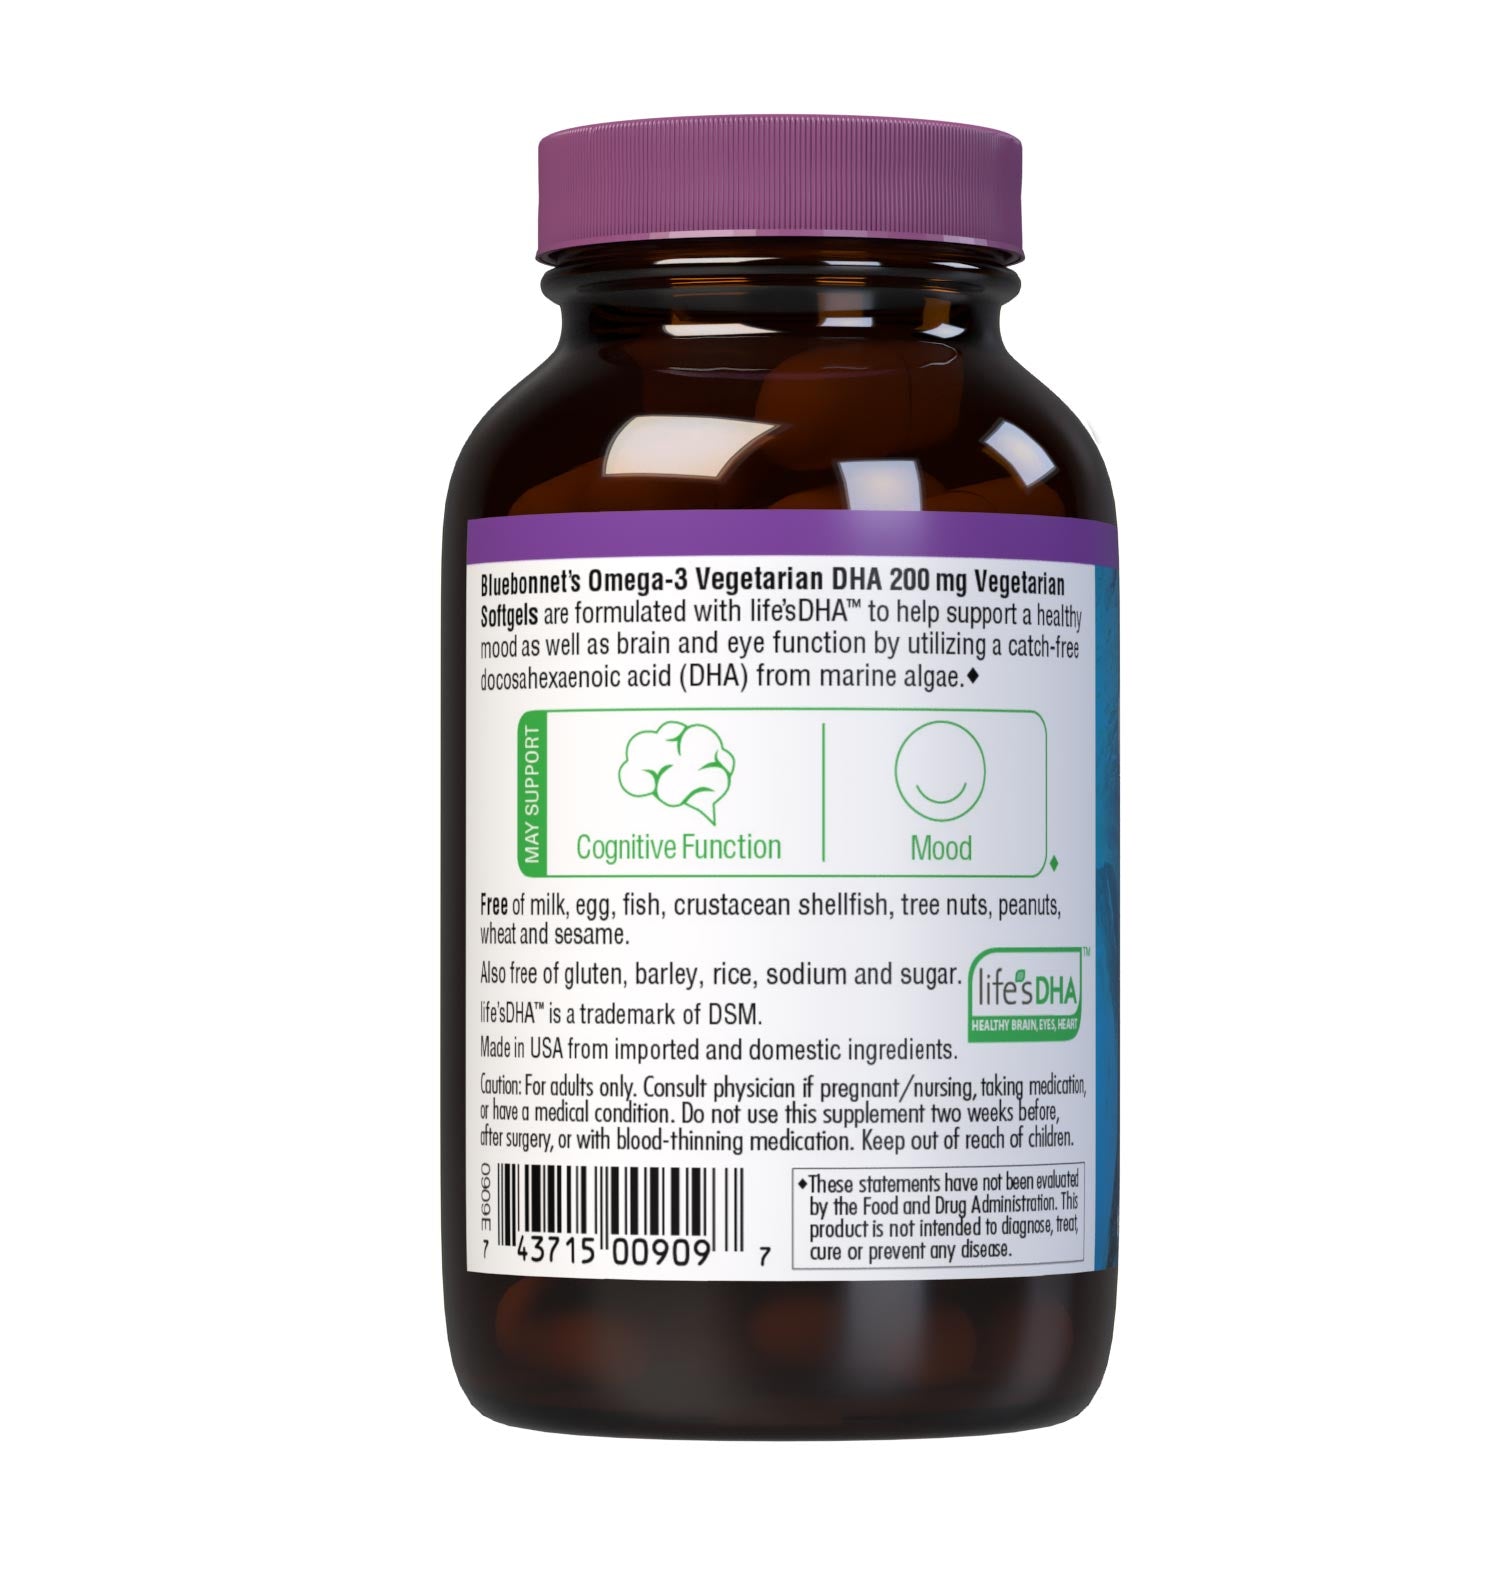 Bluebonnet’s Omega-3 Vegetarian DHA 200 mg 60 Vegetarian Softgels are formulated with life’sDHA, to help support a healthy mood as well as brain and eye function by utilzing a catch-free docosahexaenoic acid (DHA) from marine algae. Description panel. #size_60 count